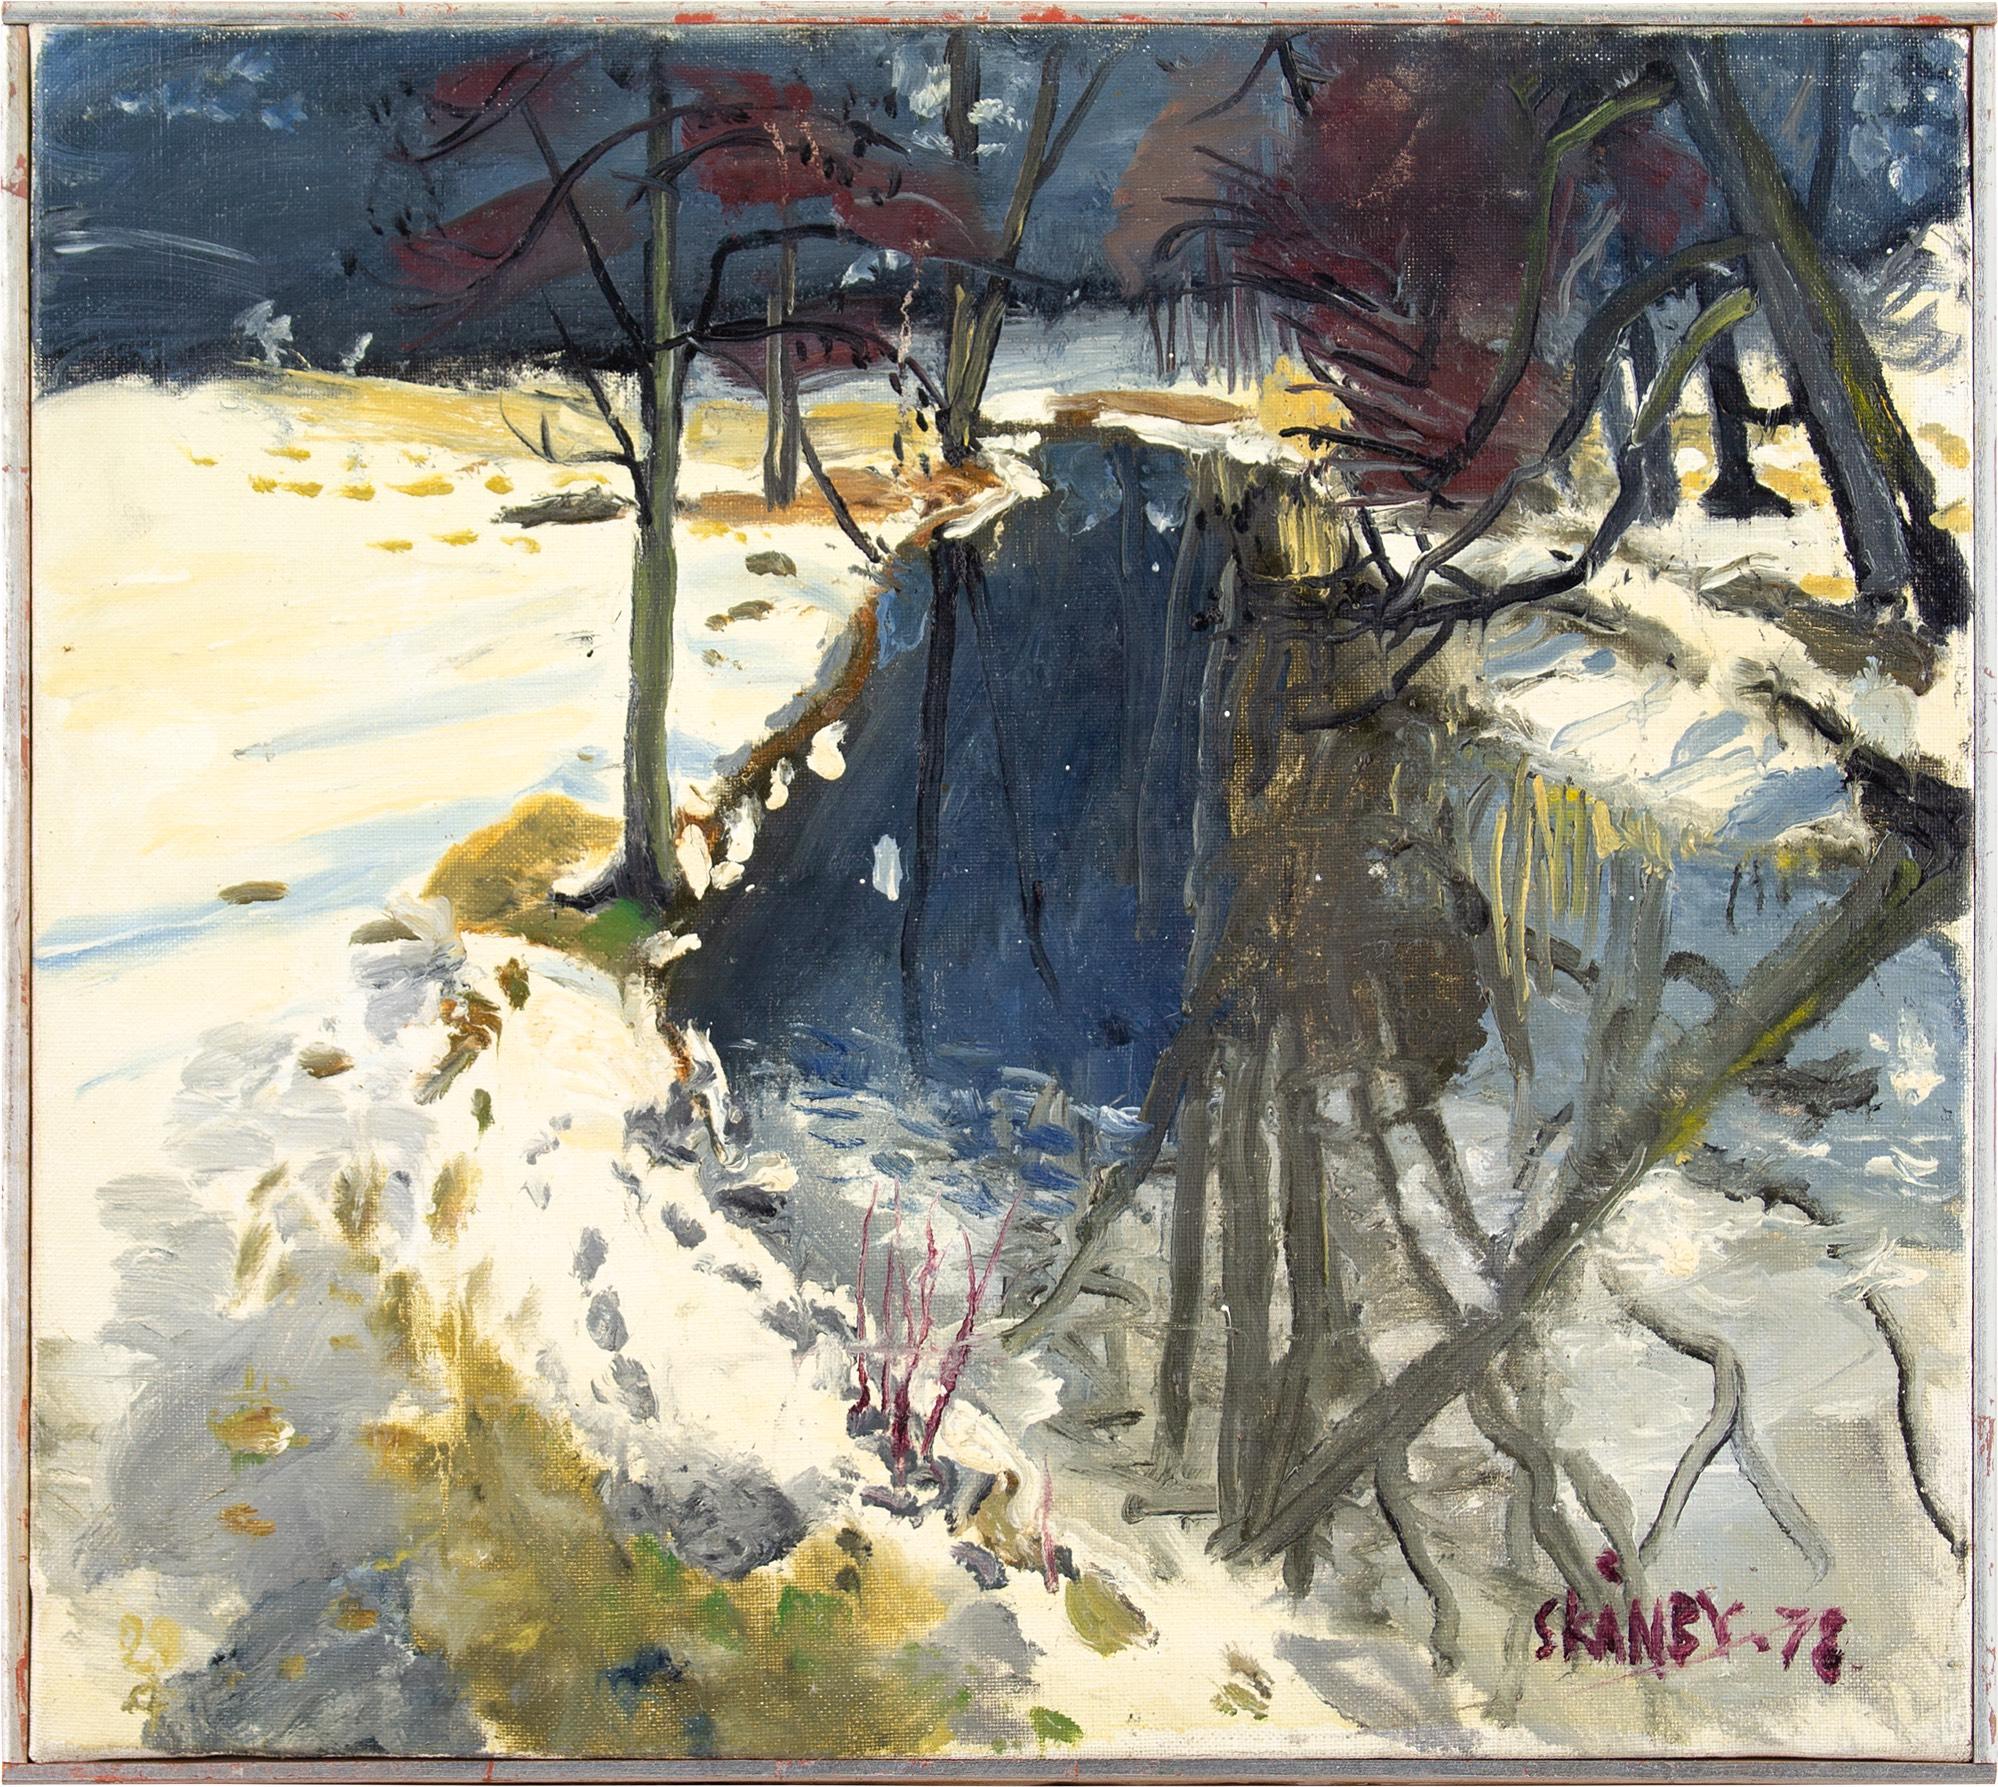 This 20th-century oil on canvas by Swedish artist Gunnar Skanby (1922-2002) depicts a chilly snow-covered landscape with a river. Deep footprints scatter the white scenery and extend past trees that cling to their final leaves. The river appears